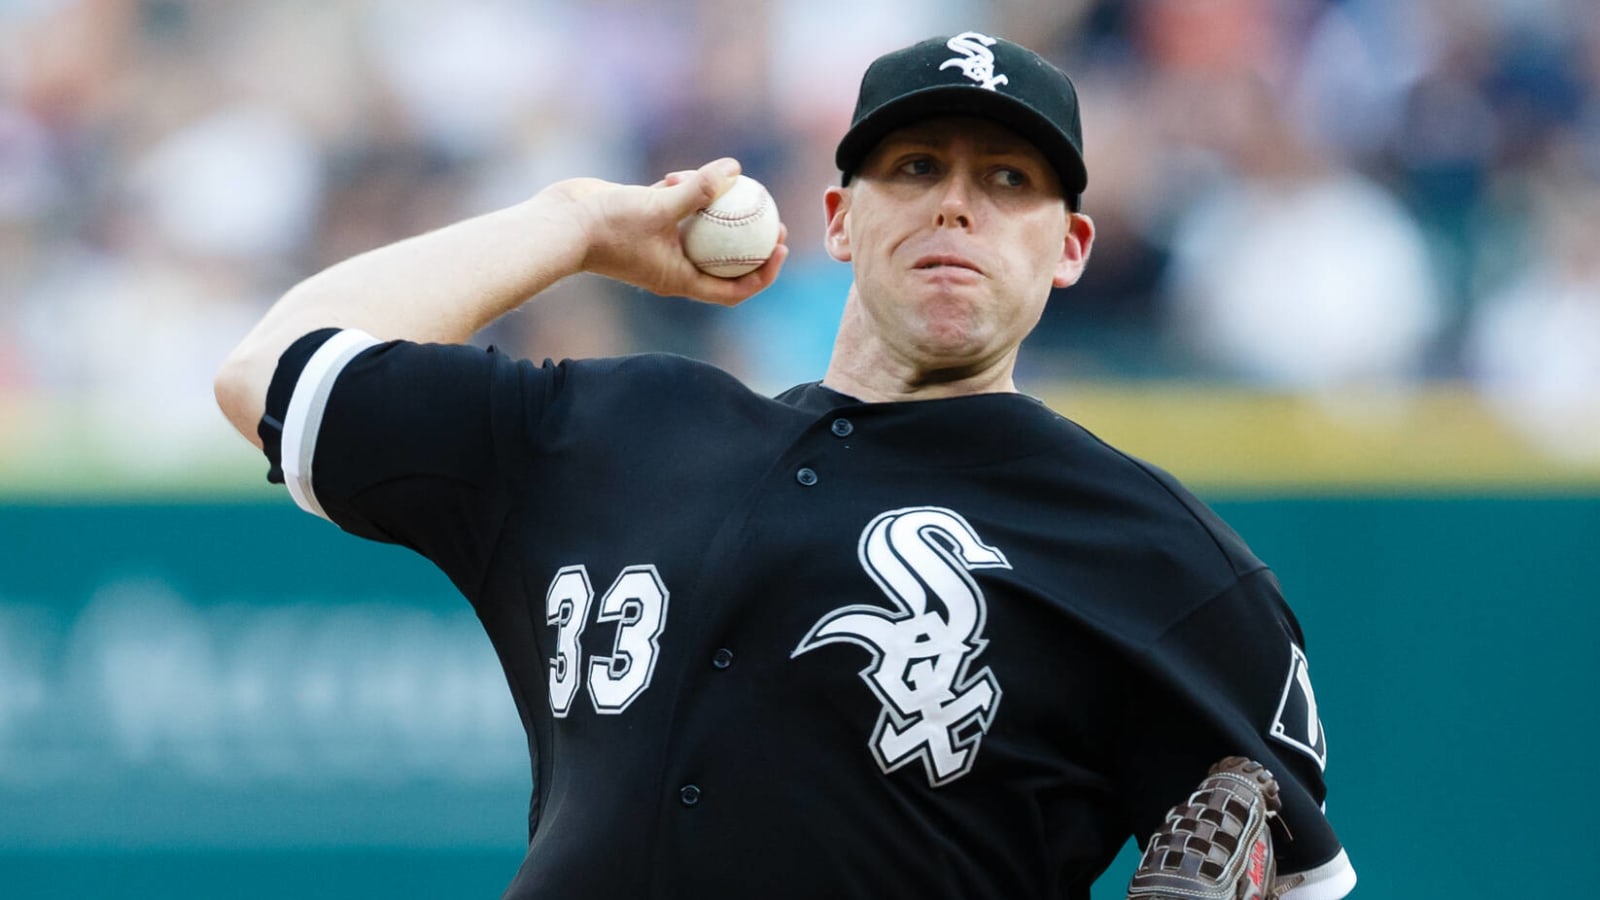 Tigers add former White Sox pitcher to coaching staff